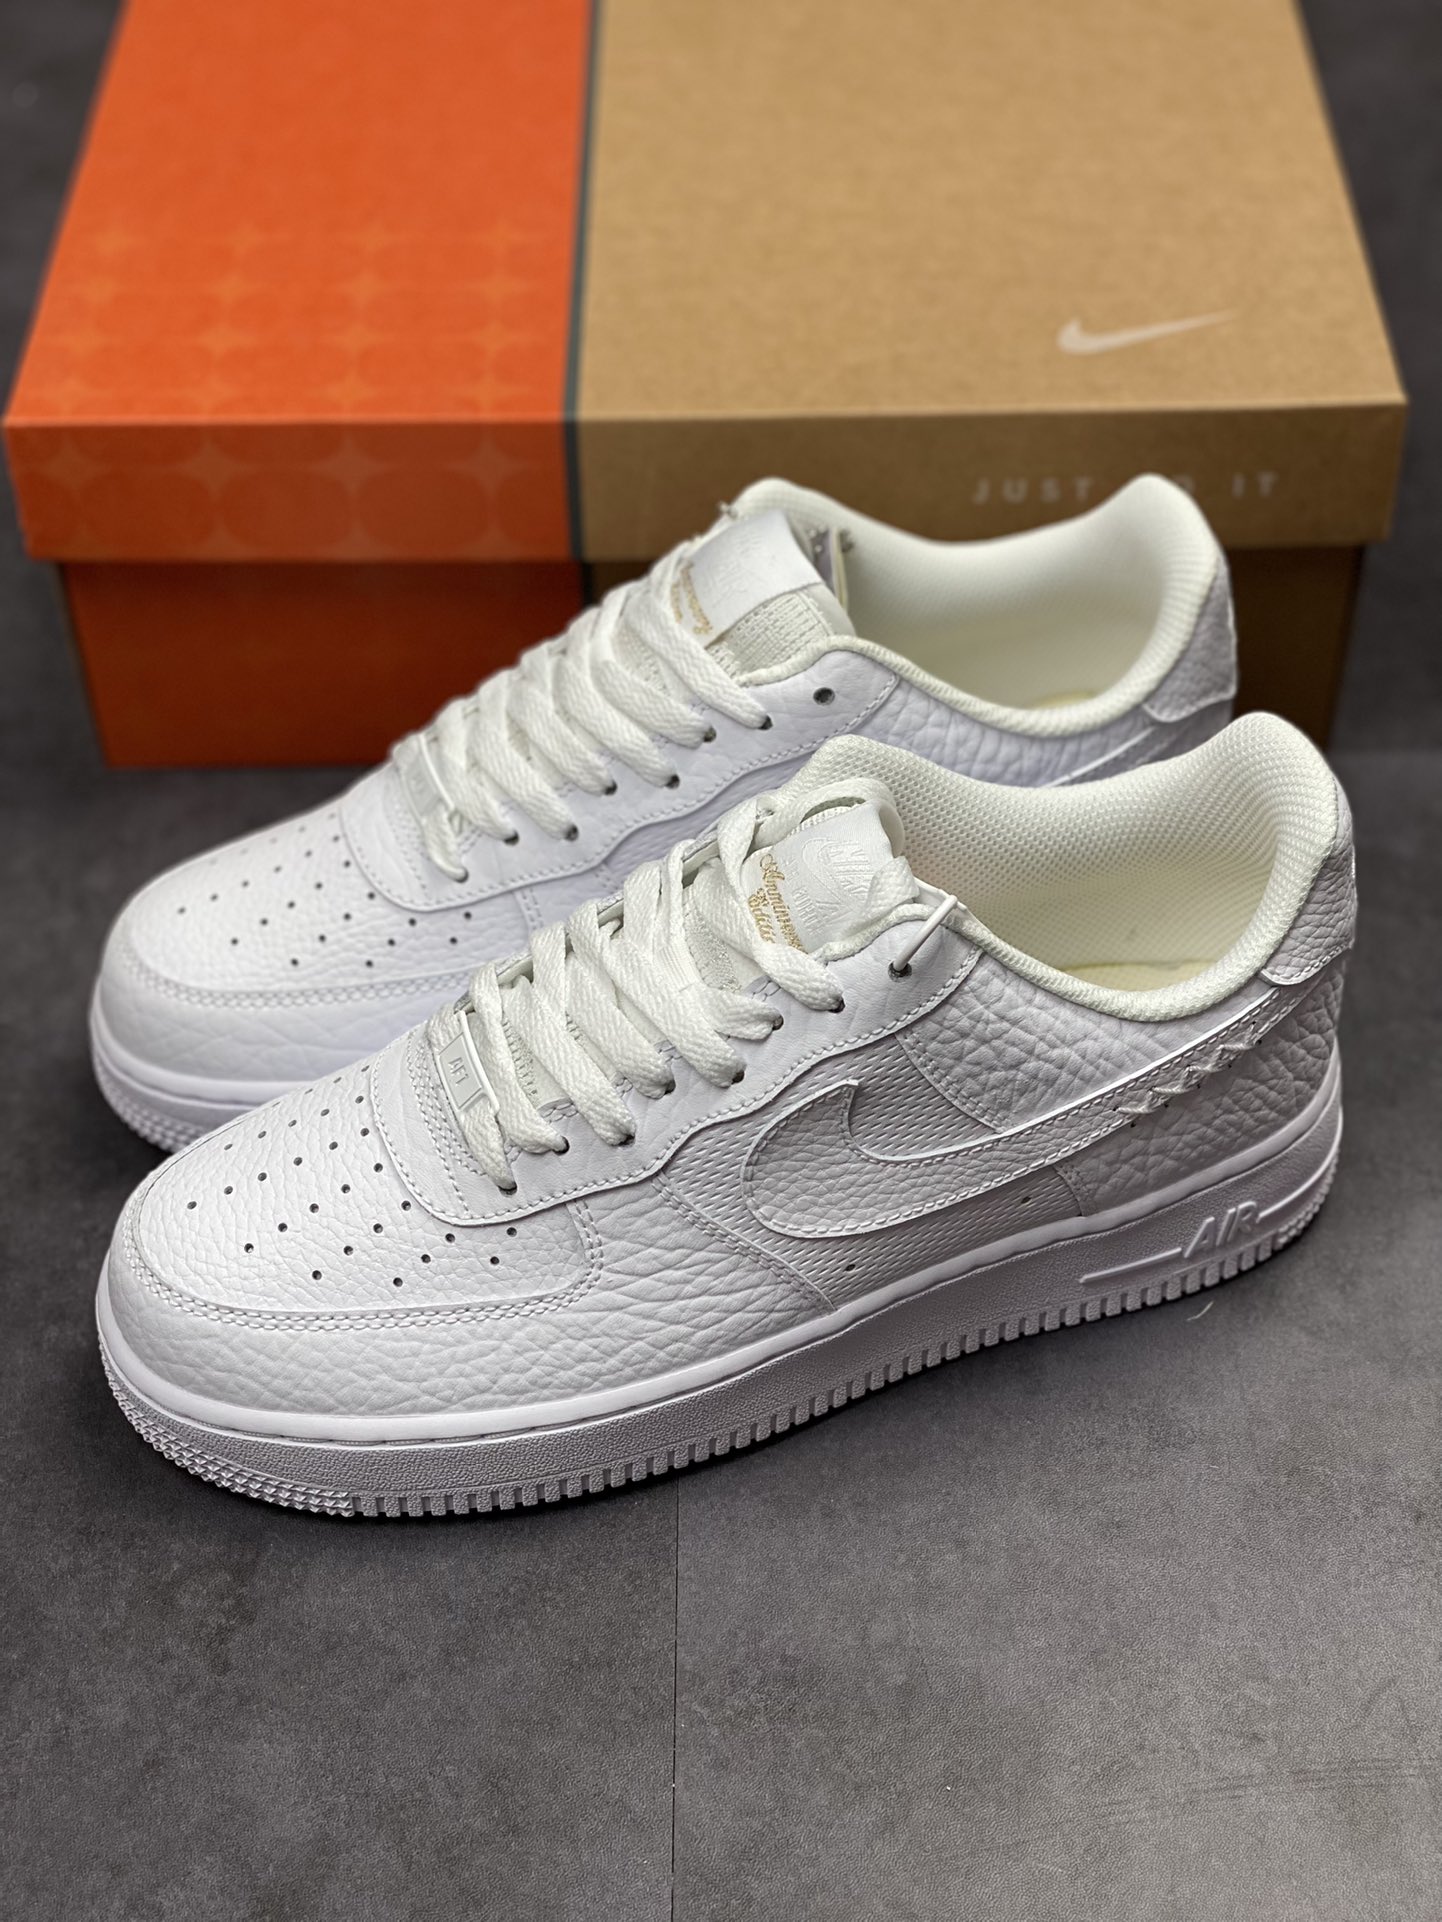 Nike Air Force 1 Low 07 grained tumbled pure white DZ4711-100